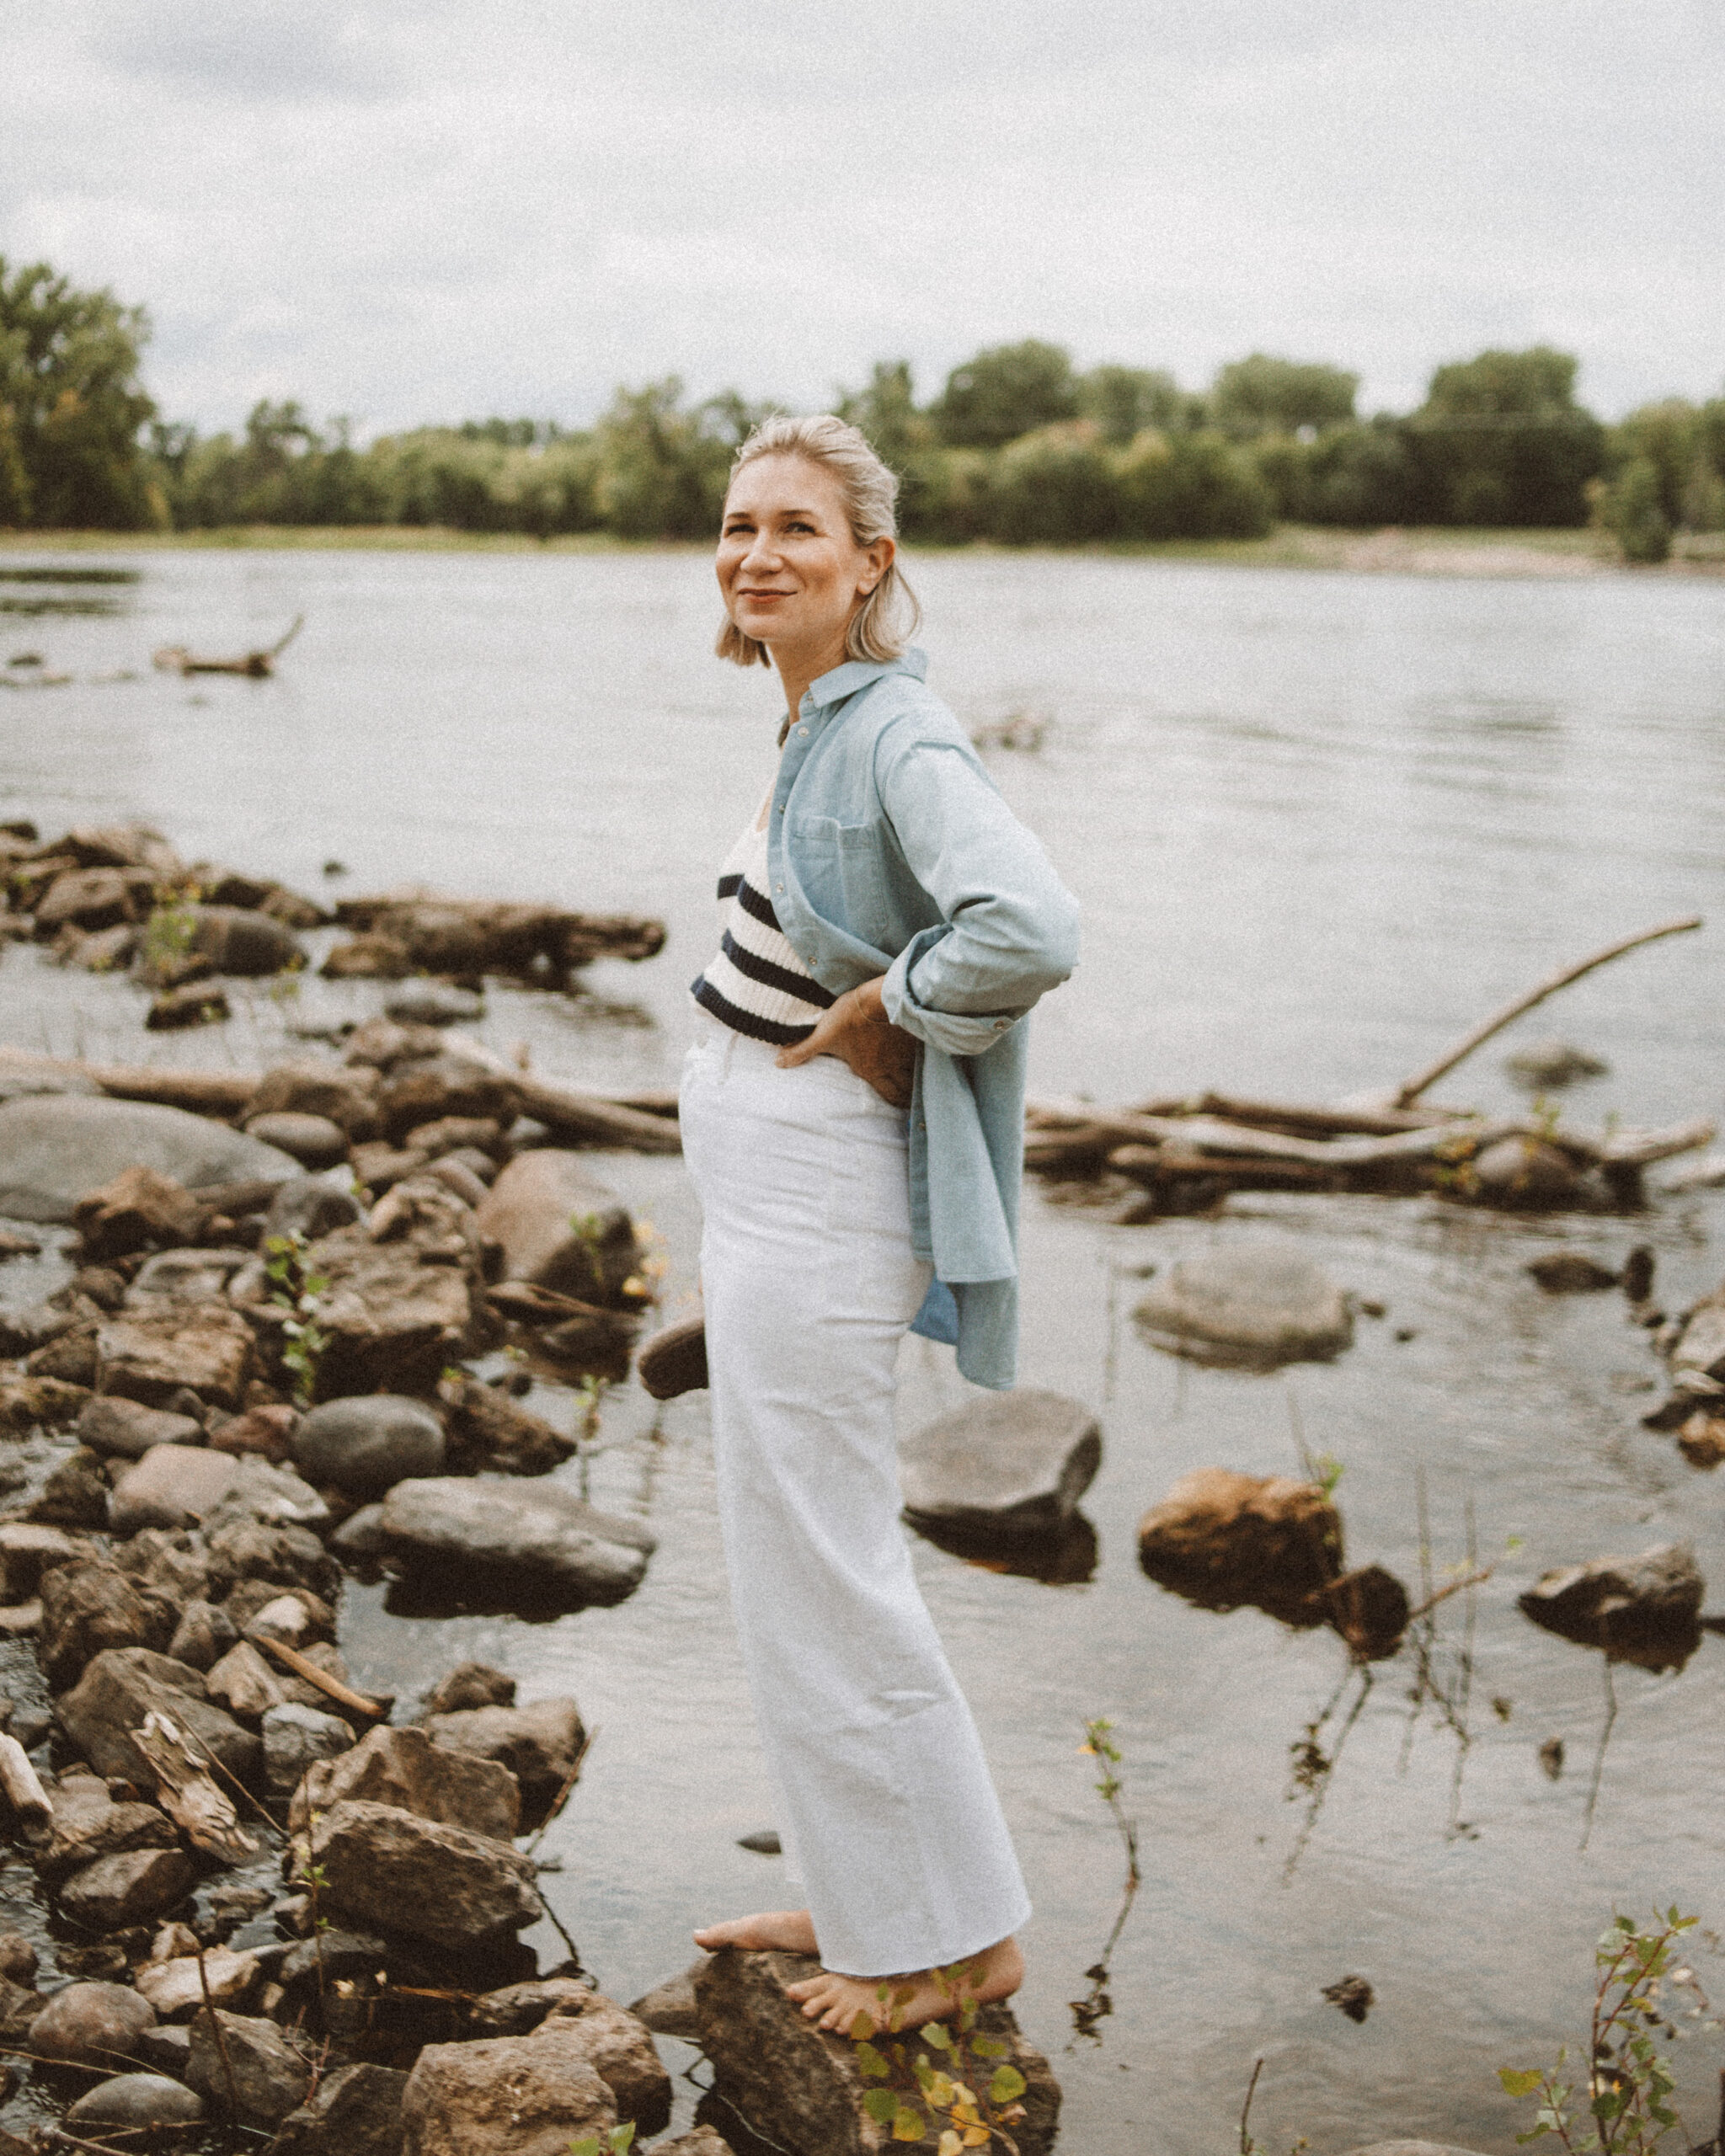 Karin Emil wears her favorite jeans for fall: a pair of white wide leg jeans with a blue oversized button down